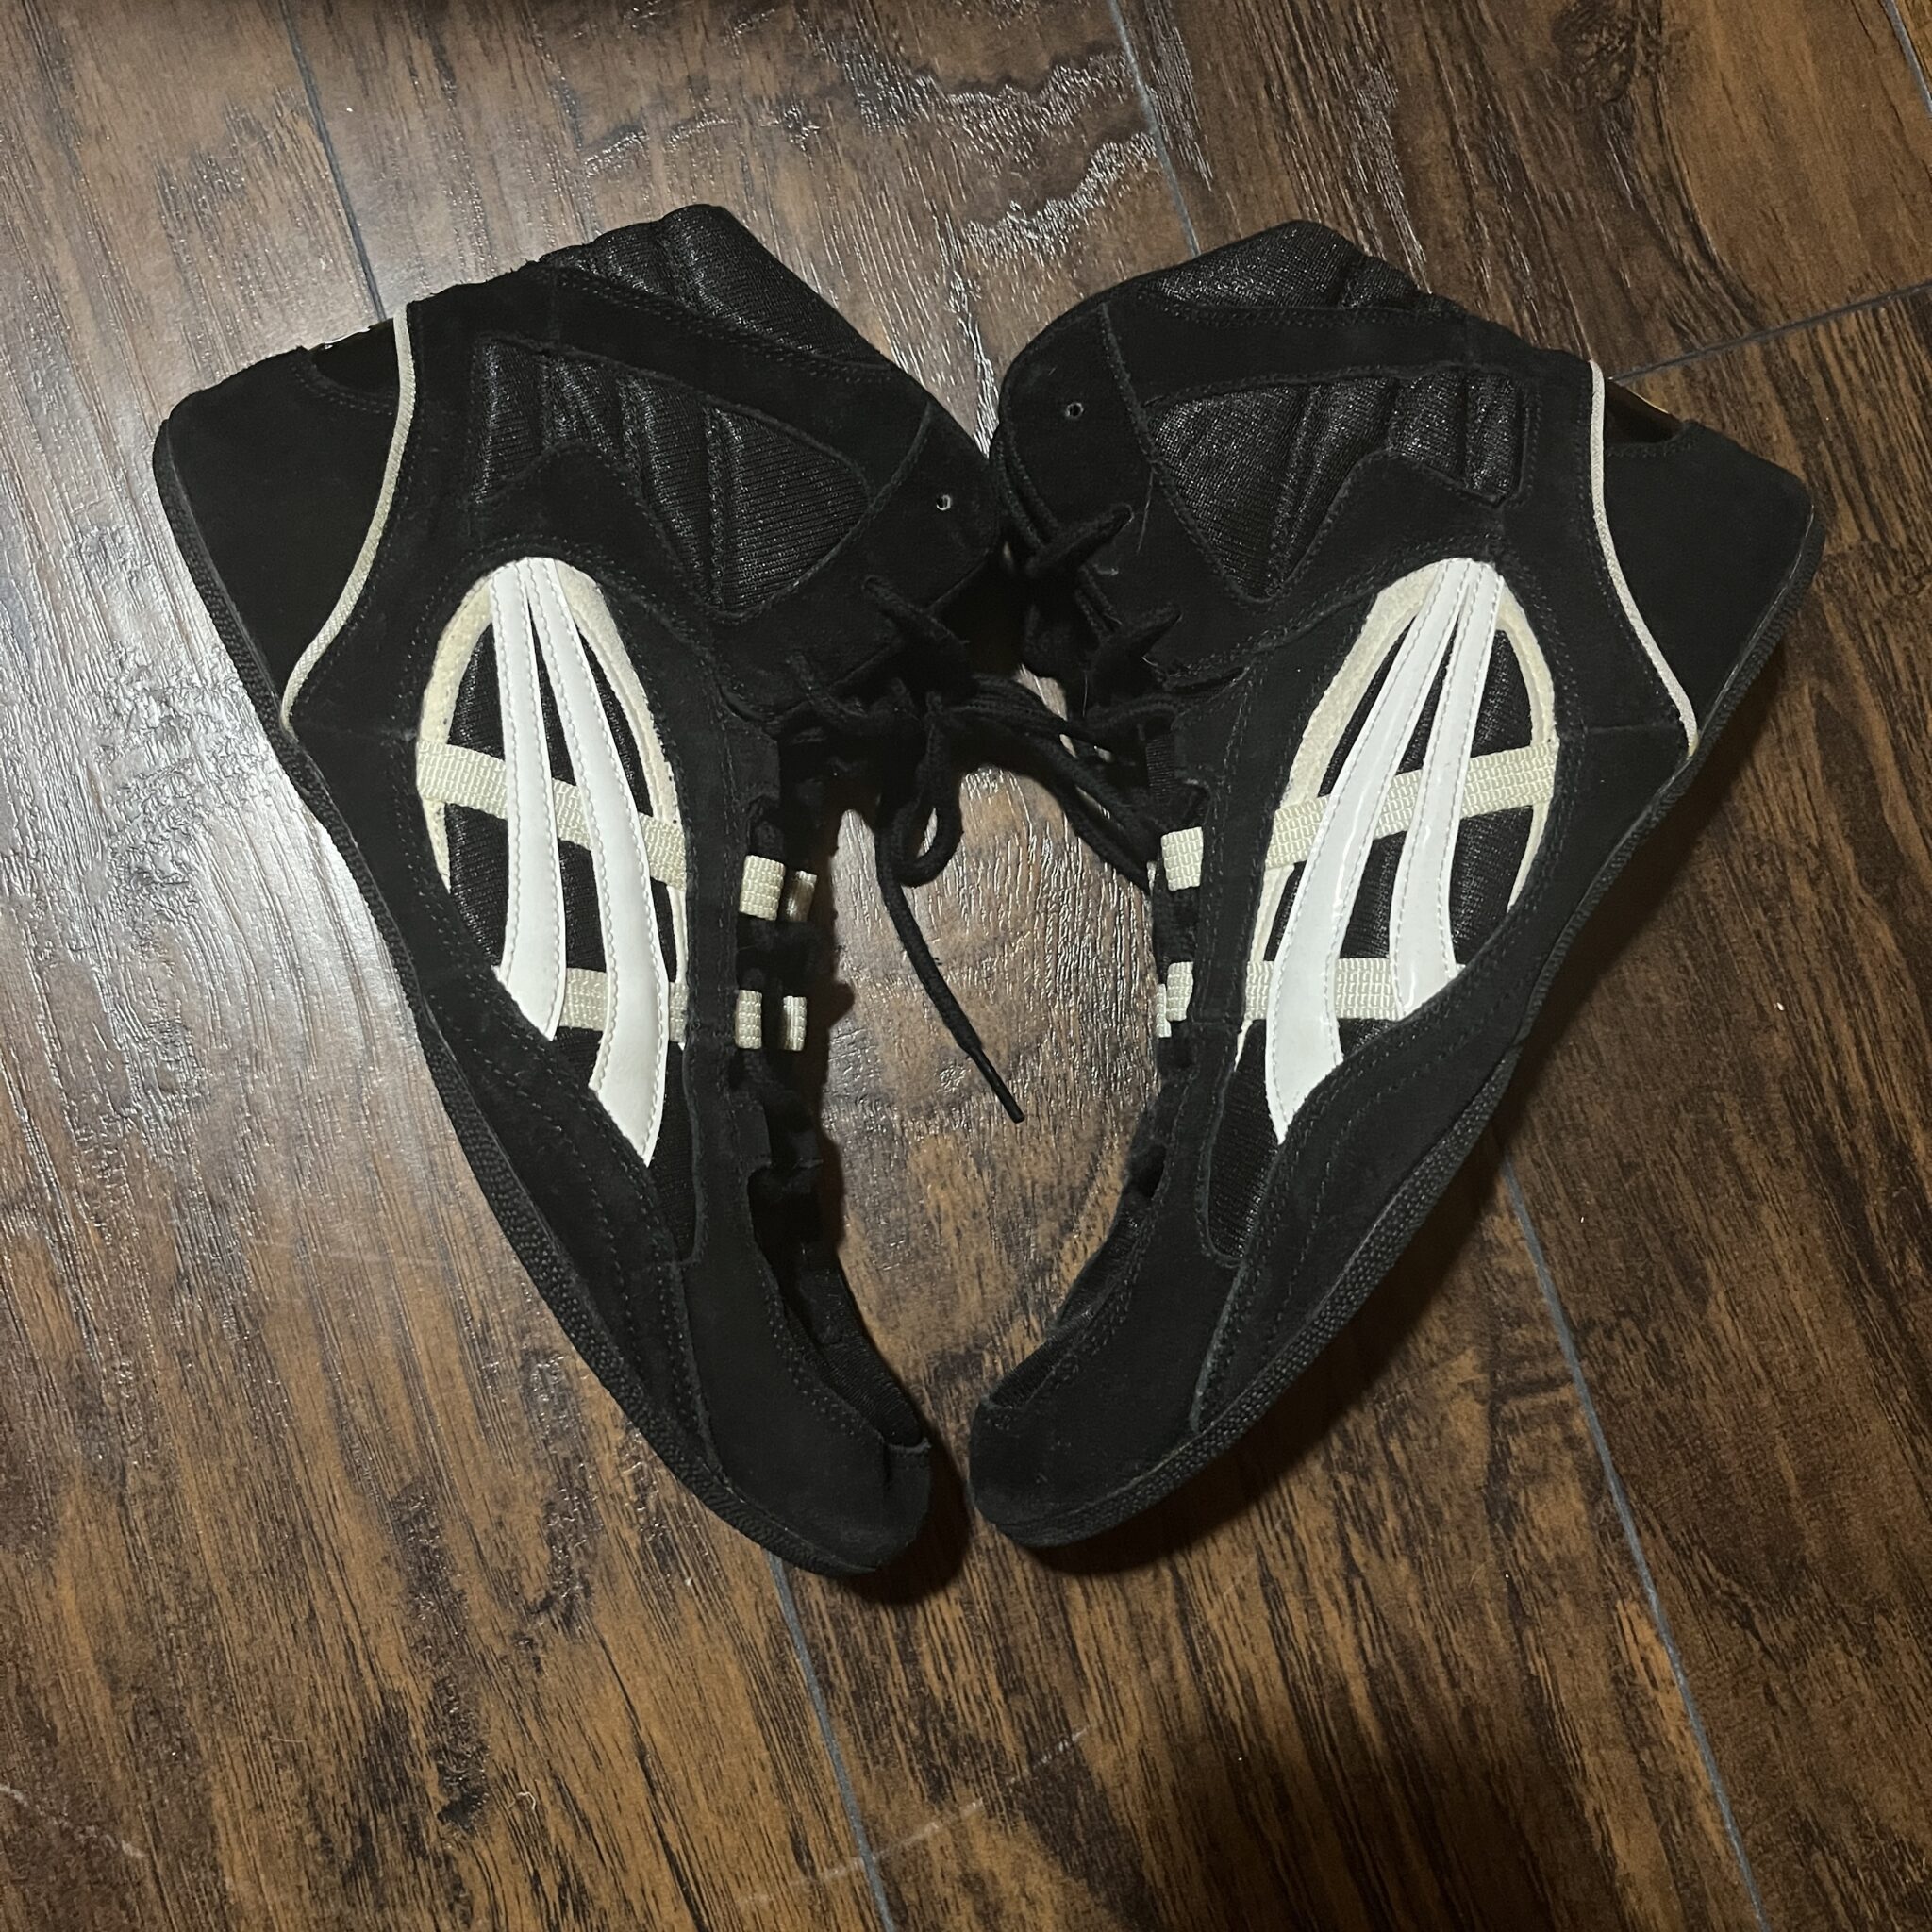 asic counter wrestling shoes in black, white and yellow colorway